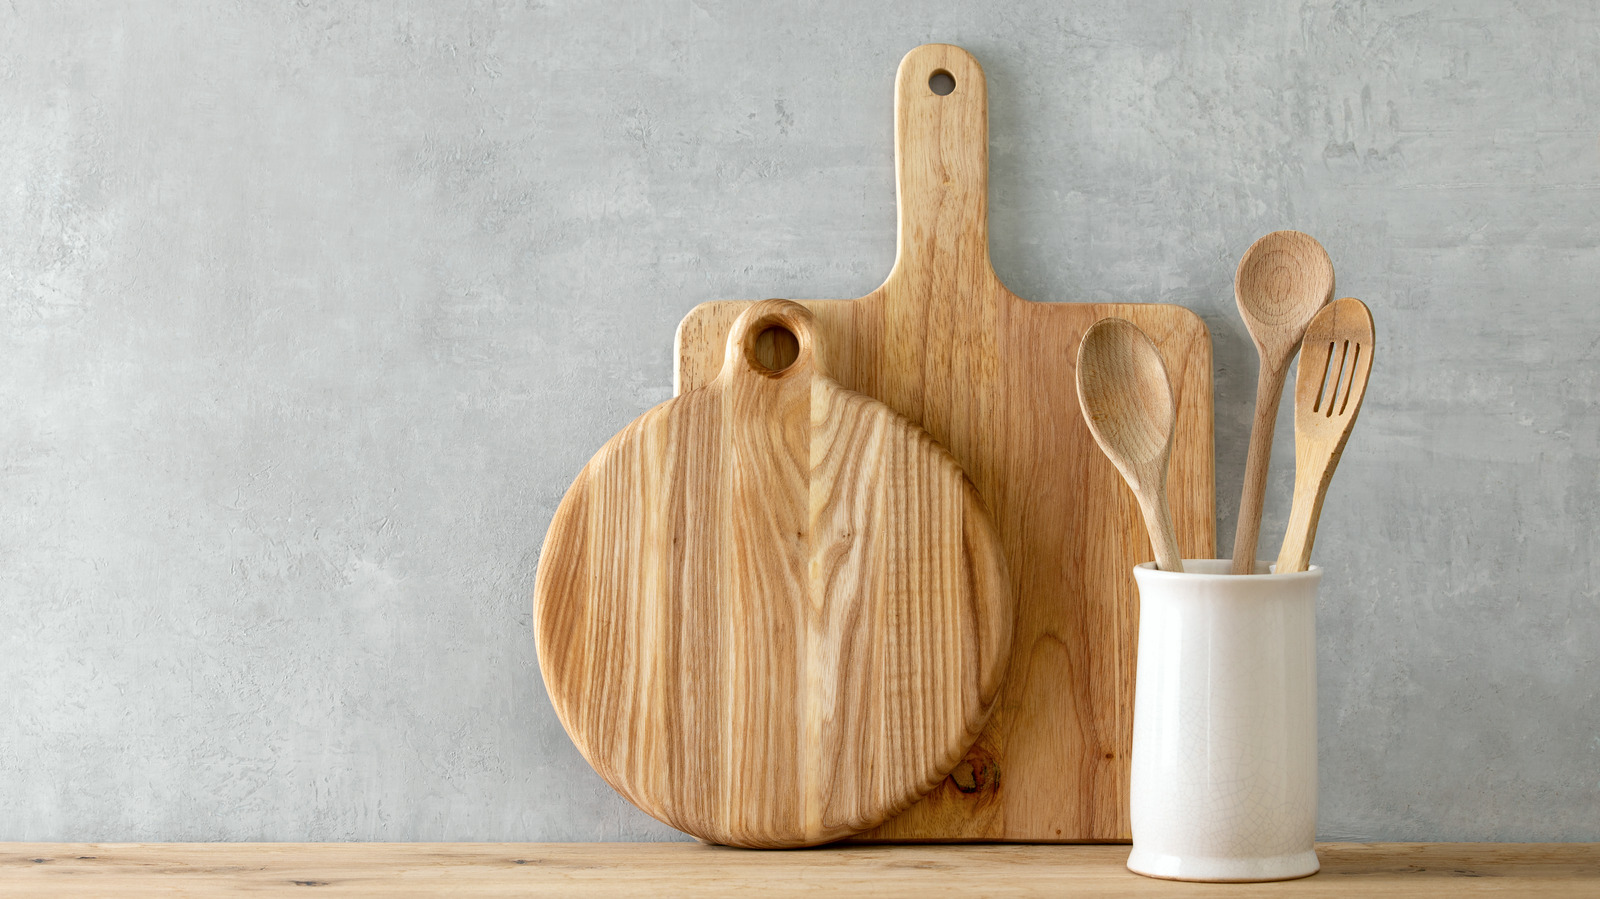 https://www.tastingtable.com/img/gallery/the-absolute-best-way-to-sanitize-your-wooden-cooking-utensils/l-intro-1662643875.jpg